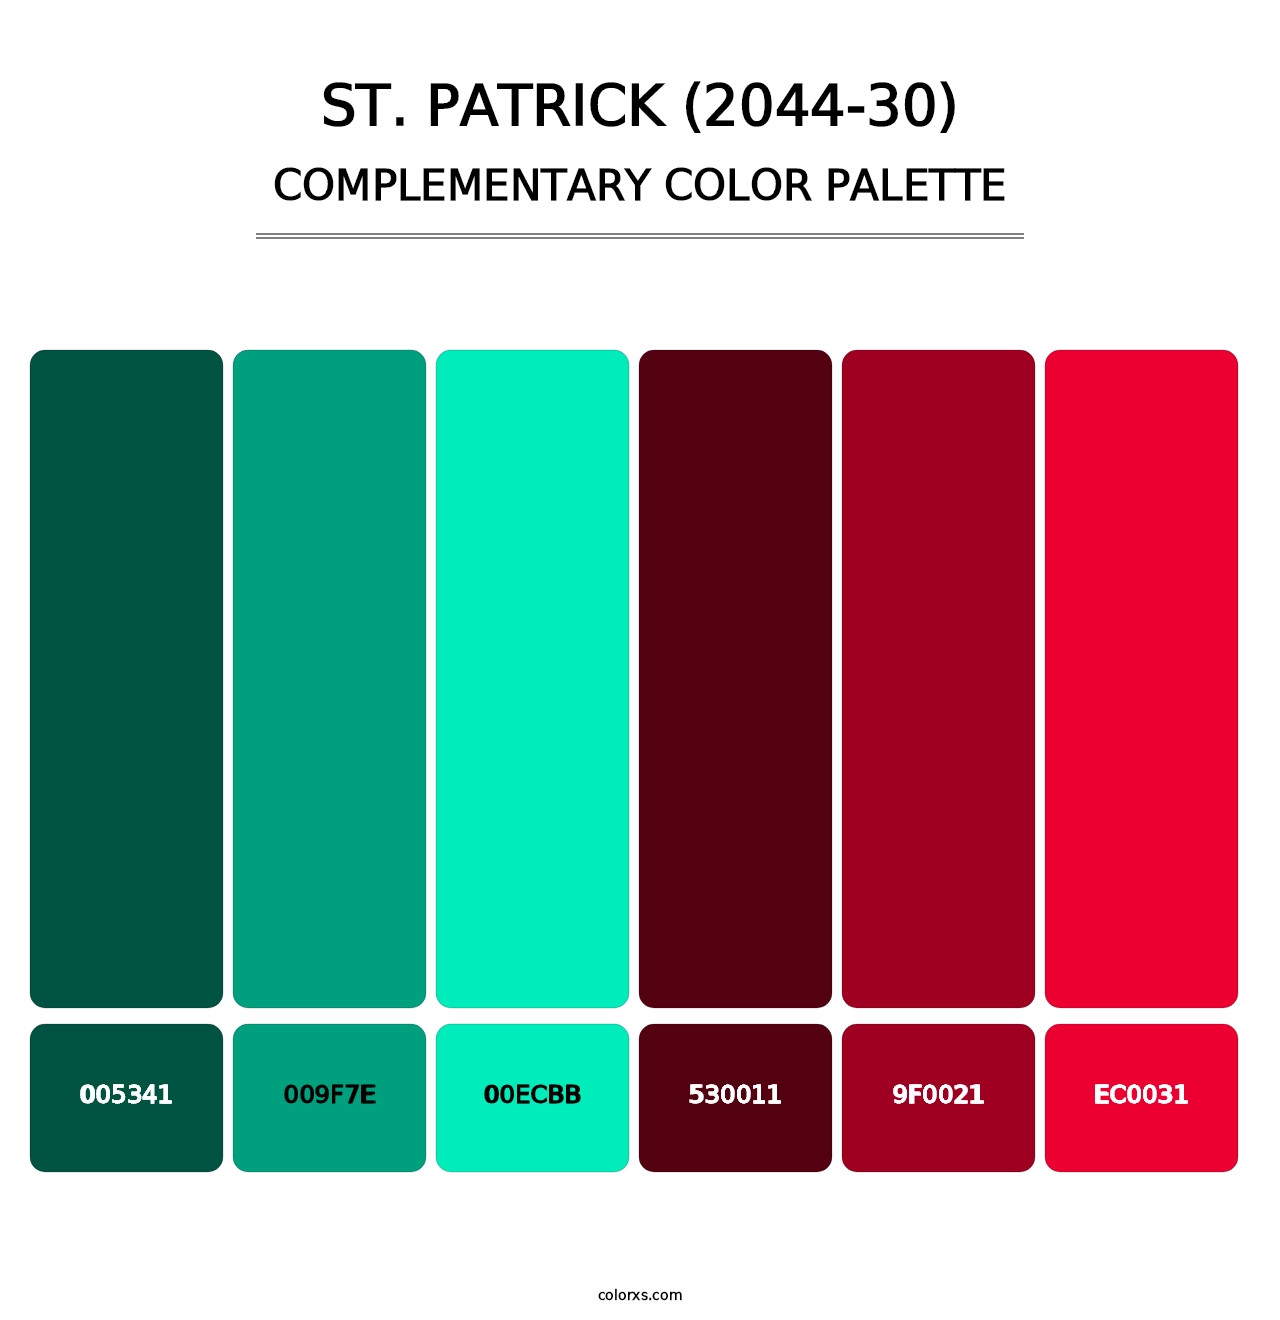 St. Patrick (2044-30) - Complementary Color Palette